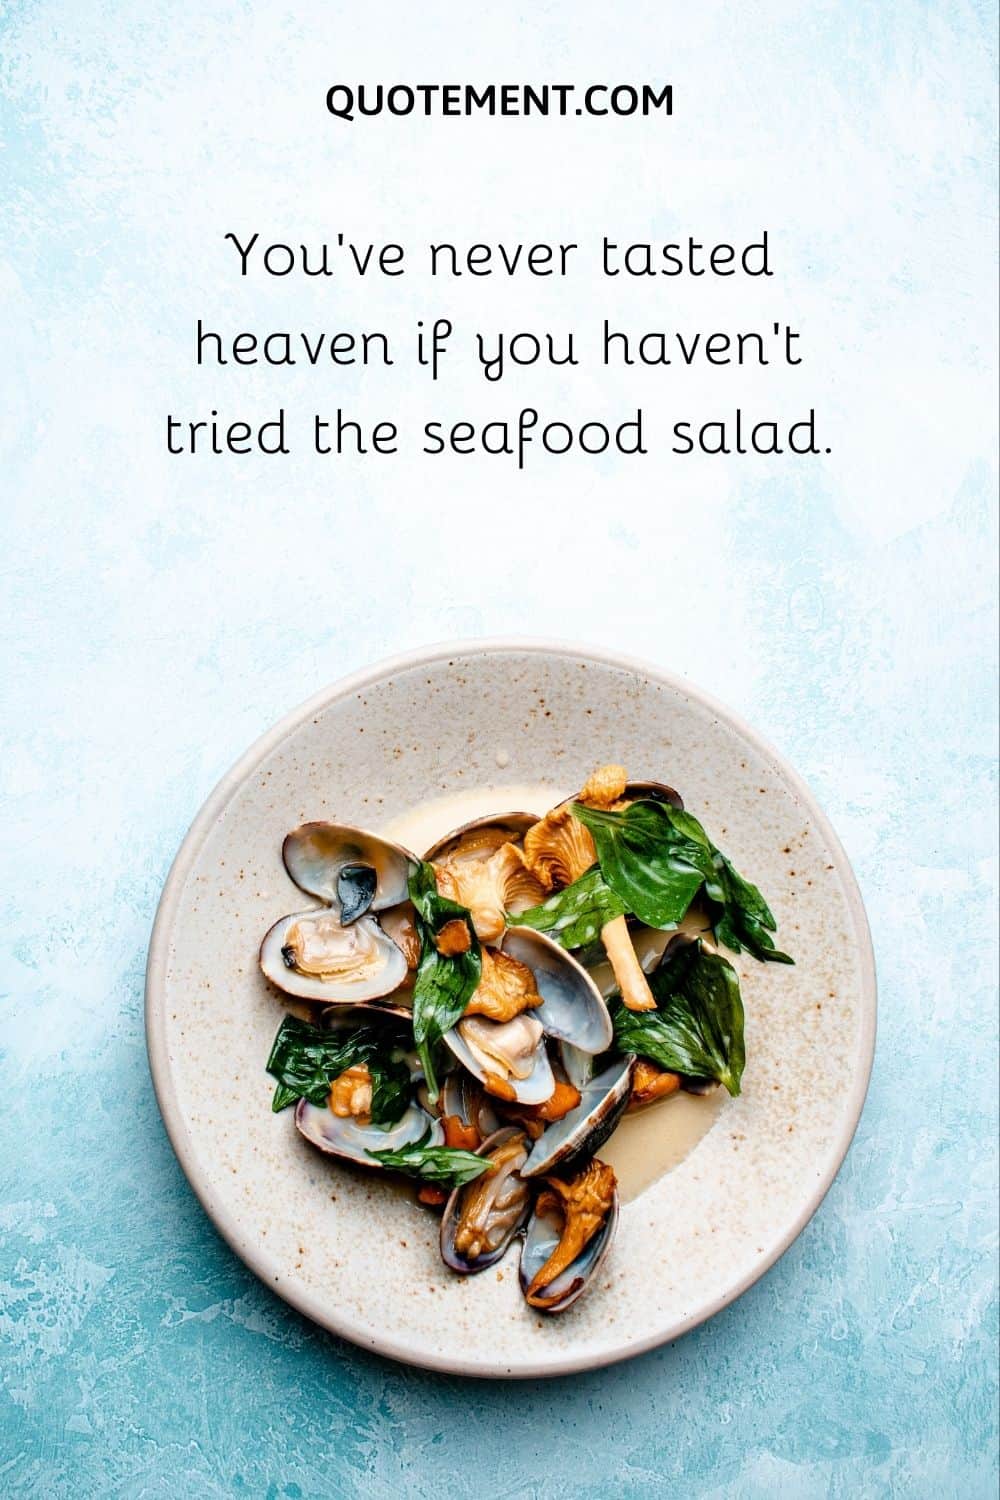 You’ve never tasted heaven if you haven’t tried the seafood salad.